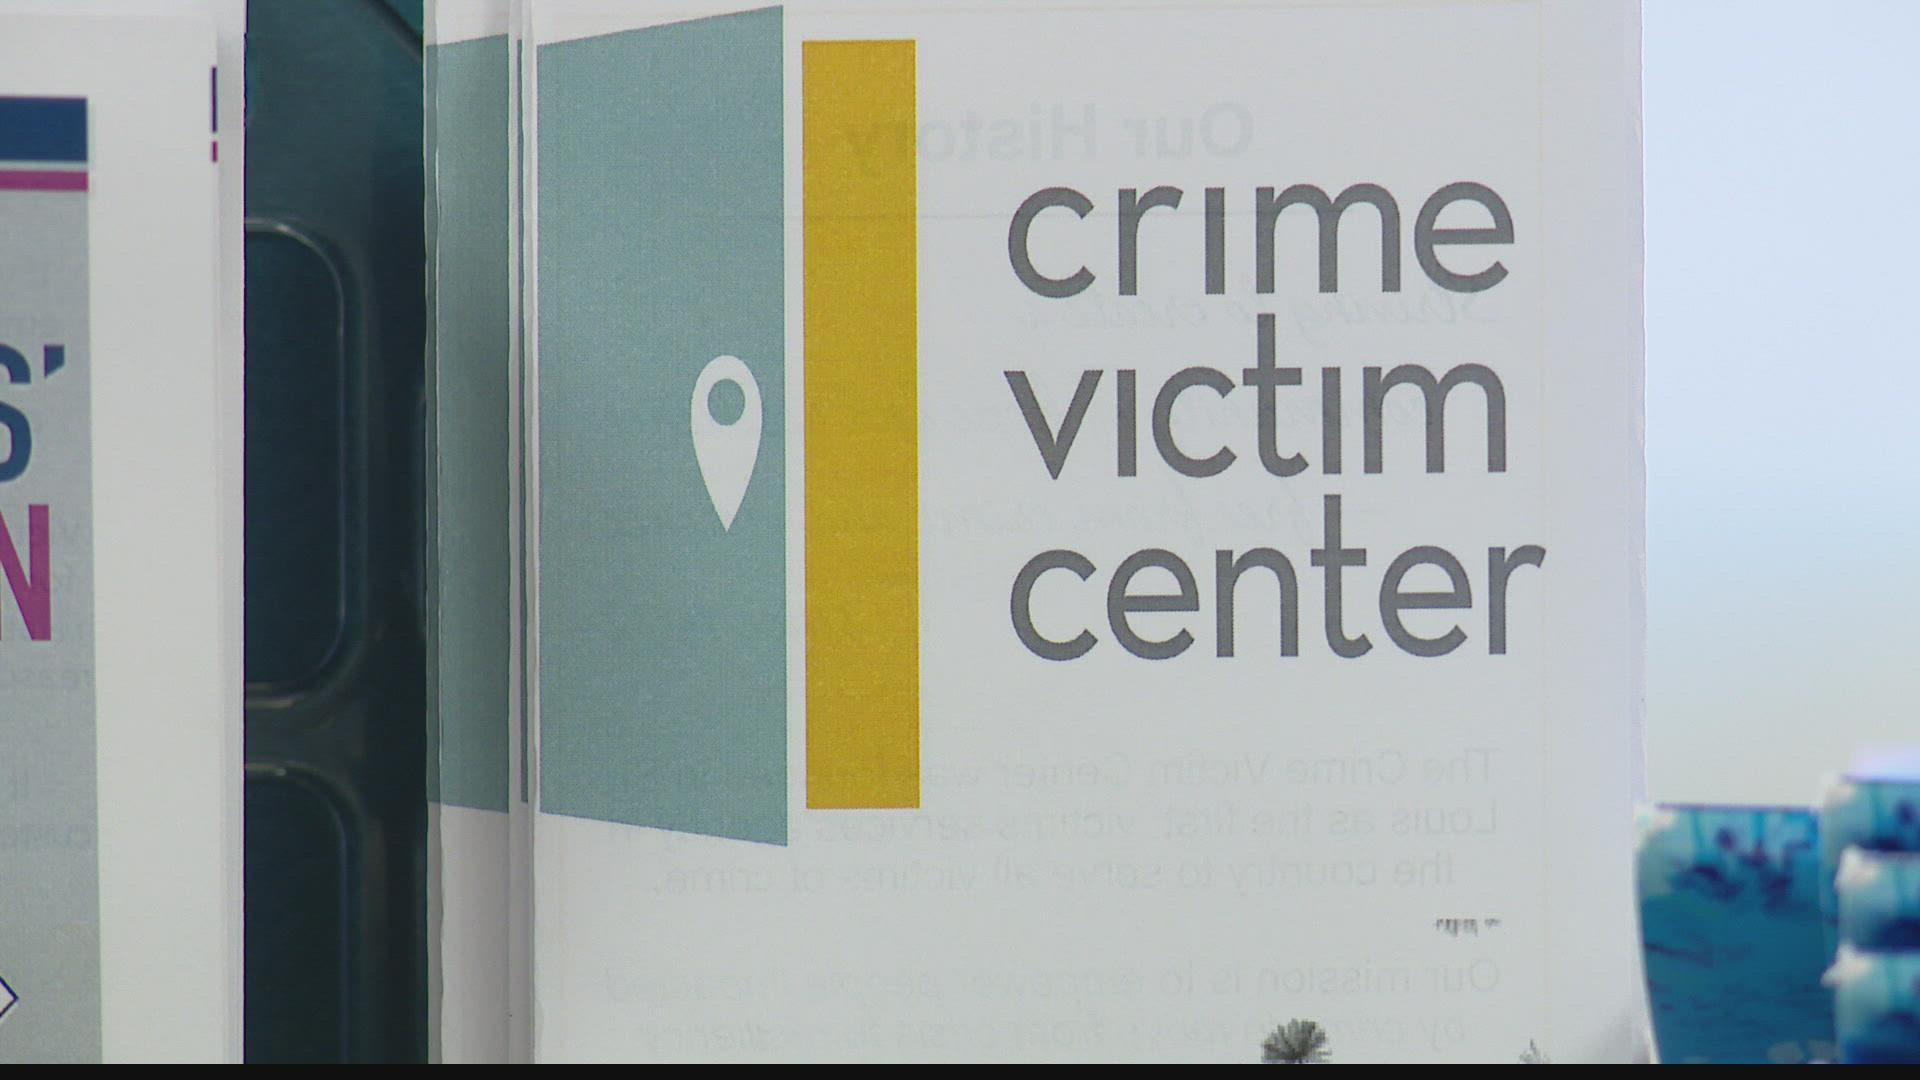 The mission of the Crime Victim Center is to empower those affected by crime in St. Louis. They are a part of Give STL Day.